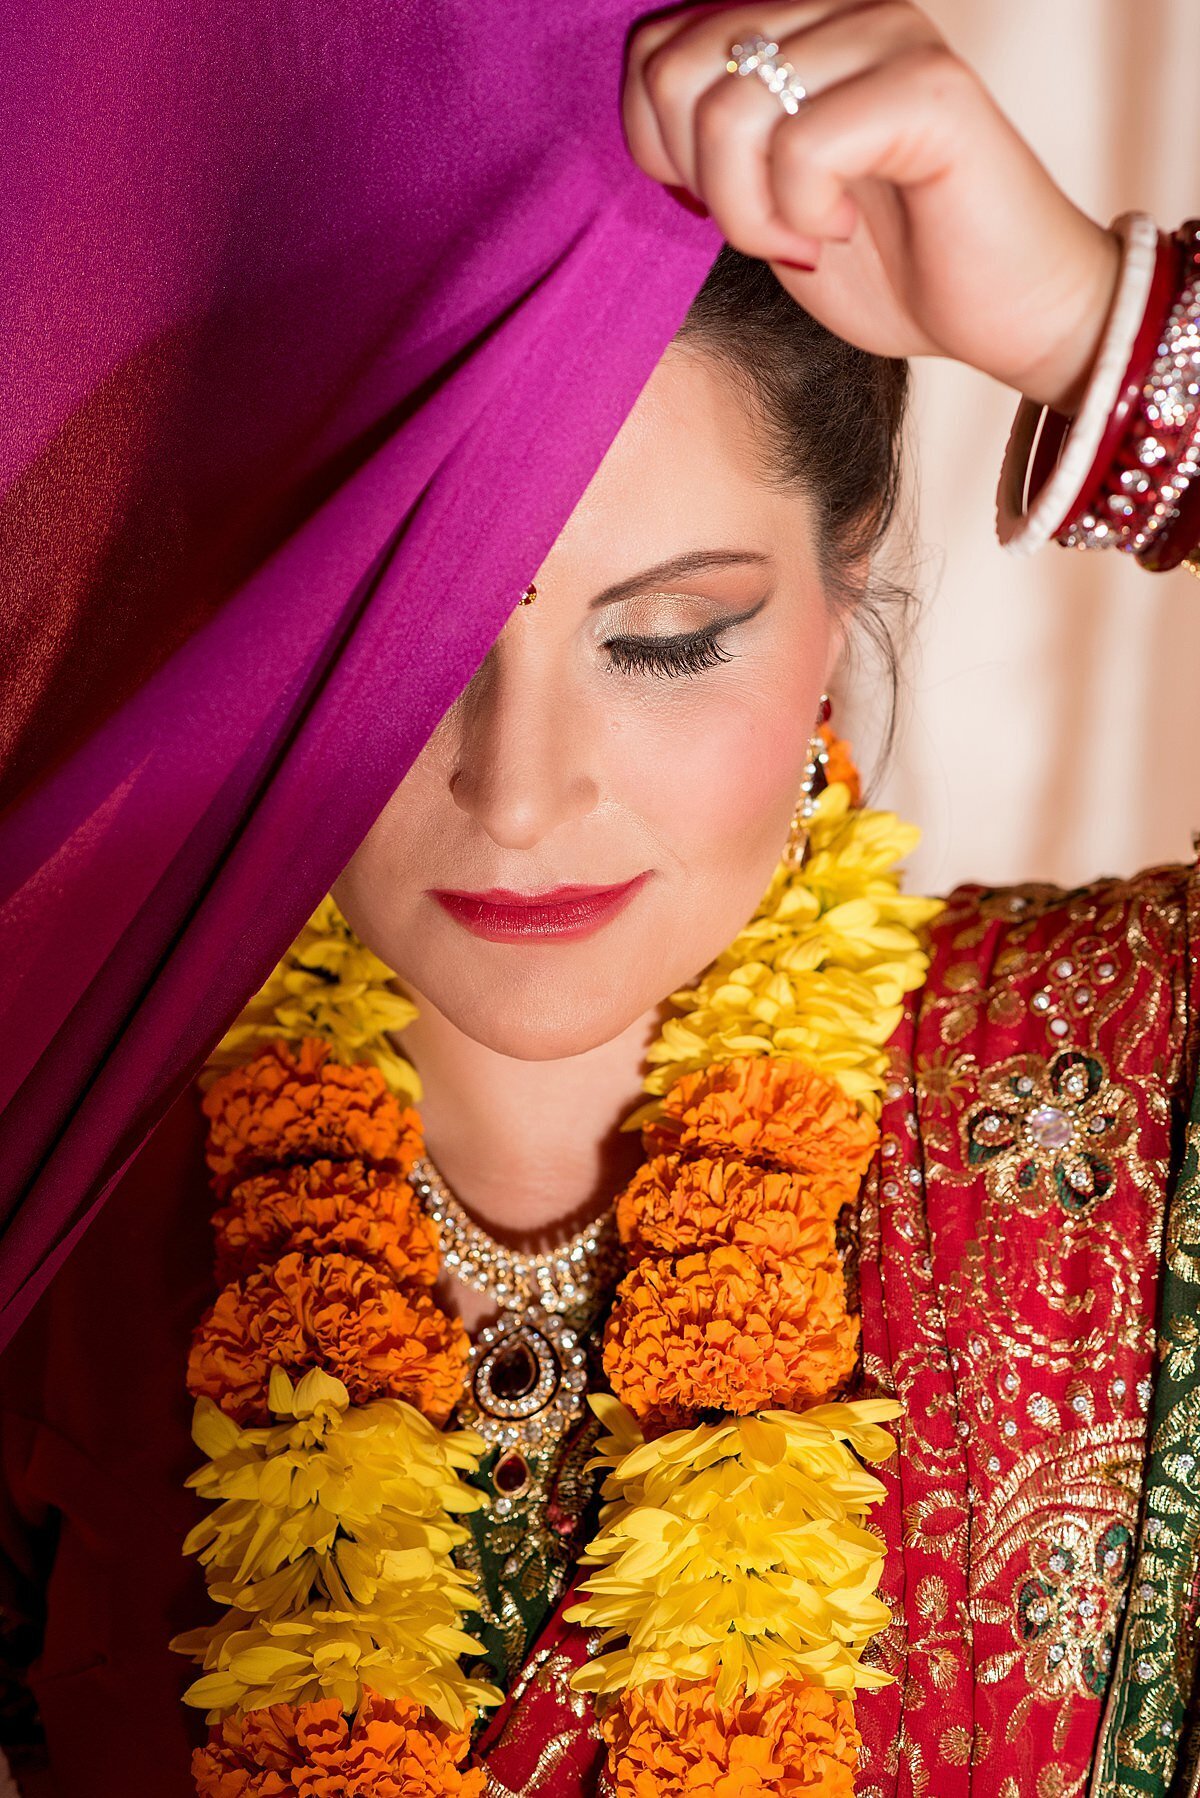 Hindu bride wearing a red and green saree with gold detail holding up a magenta dupatta. Indian bride wearing a varmala of orange marigolds and yellow mums.